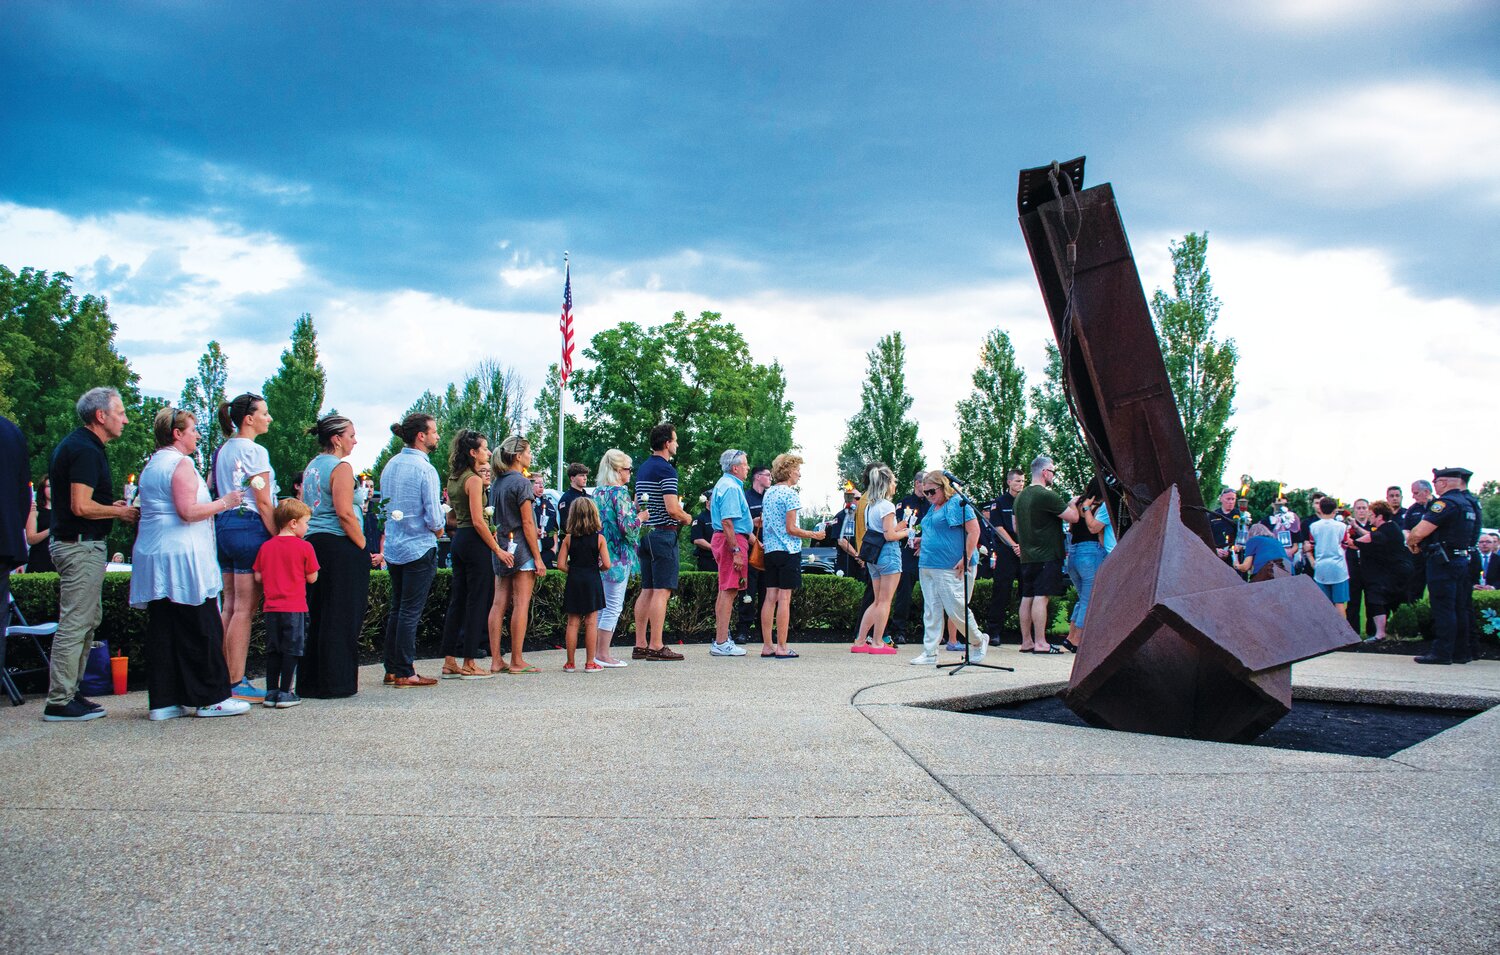 During Sunday’s vigil at the Garden of Reflection, attendees stand in line to place flowers in front of torches dedicated to the victims of the July 15 flash floods in Upper Makefield.